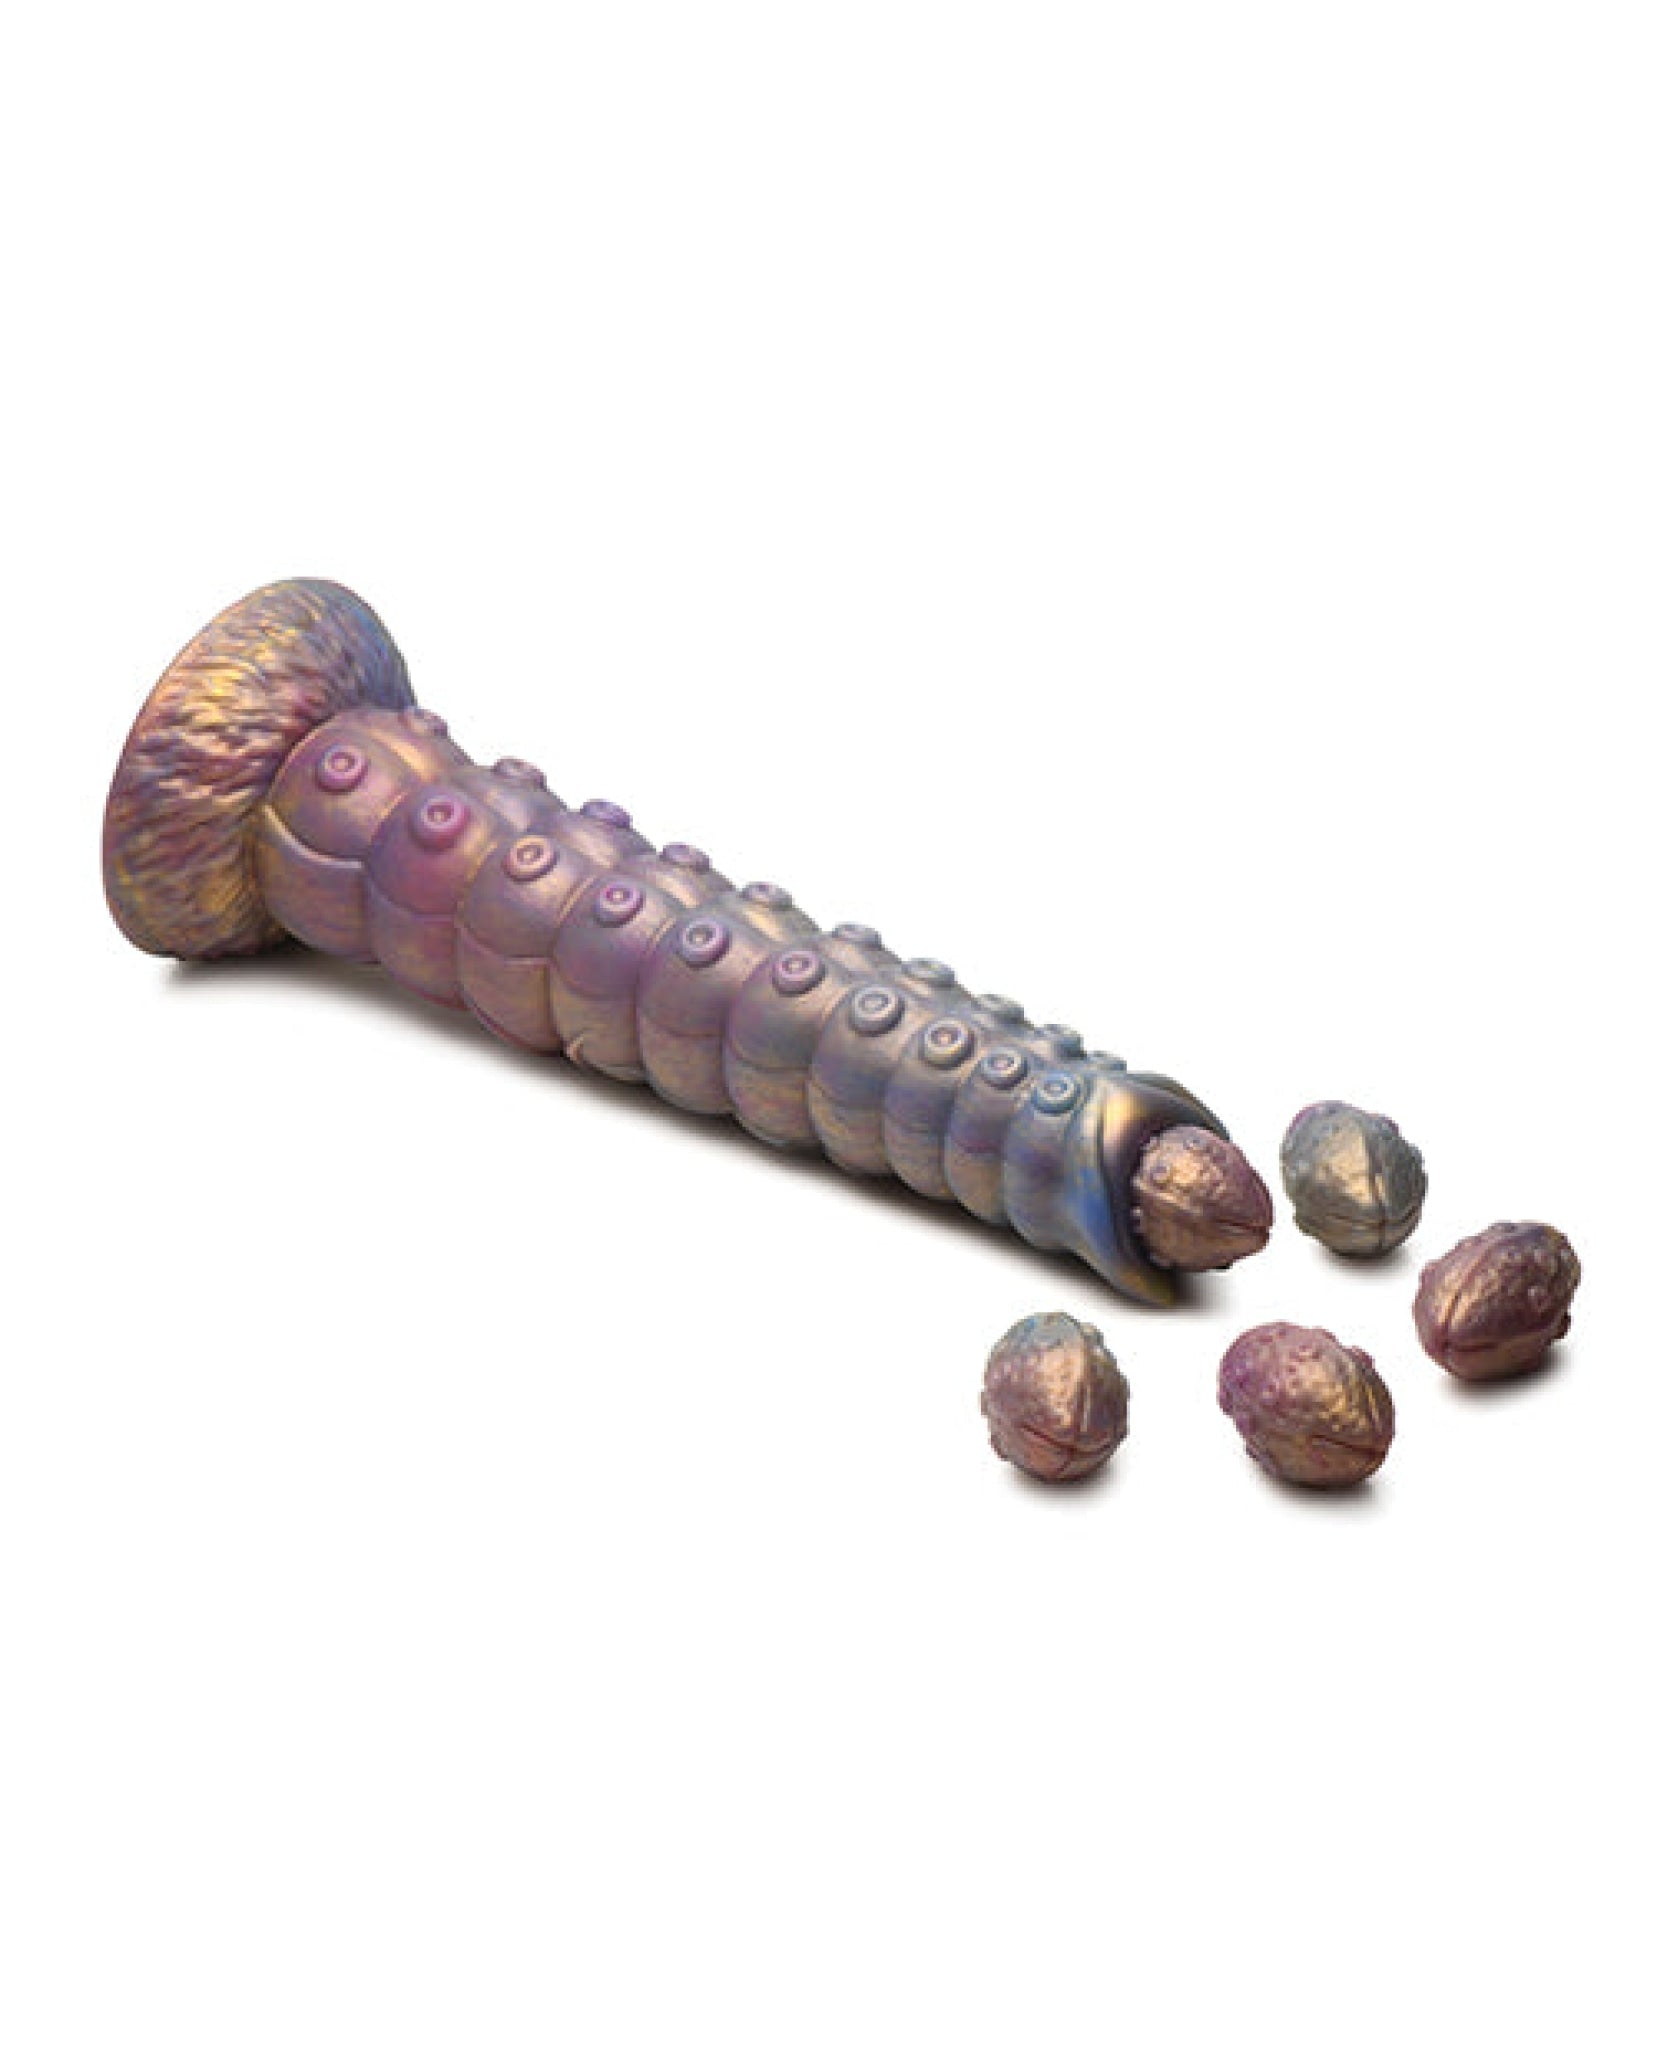 Creature Cocks Deep Invader Tentacle Ovipositor Silicone Dildo w/Eggs - Multi Color Xr LLC